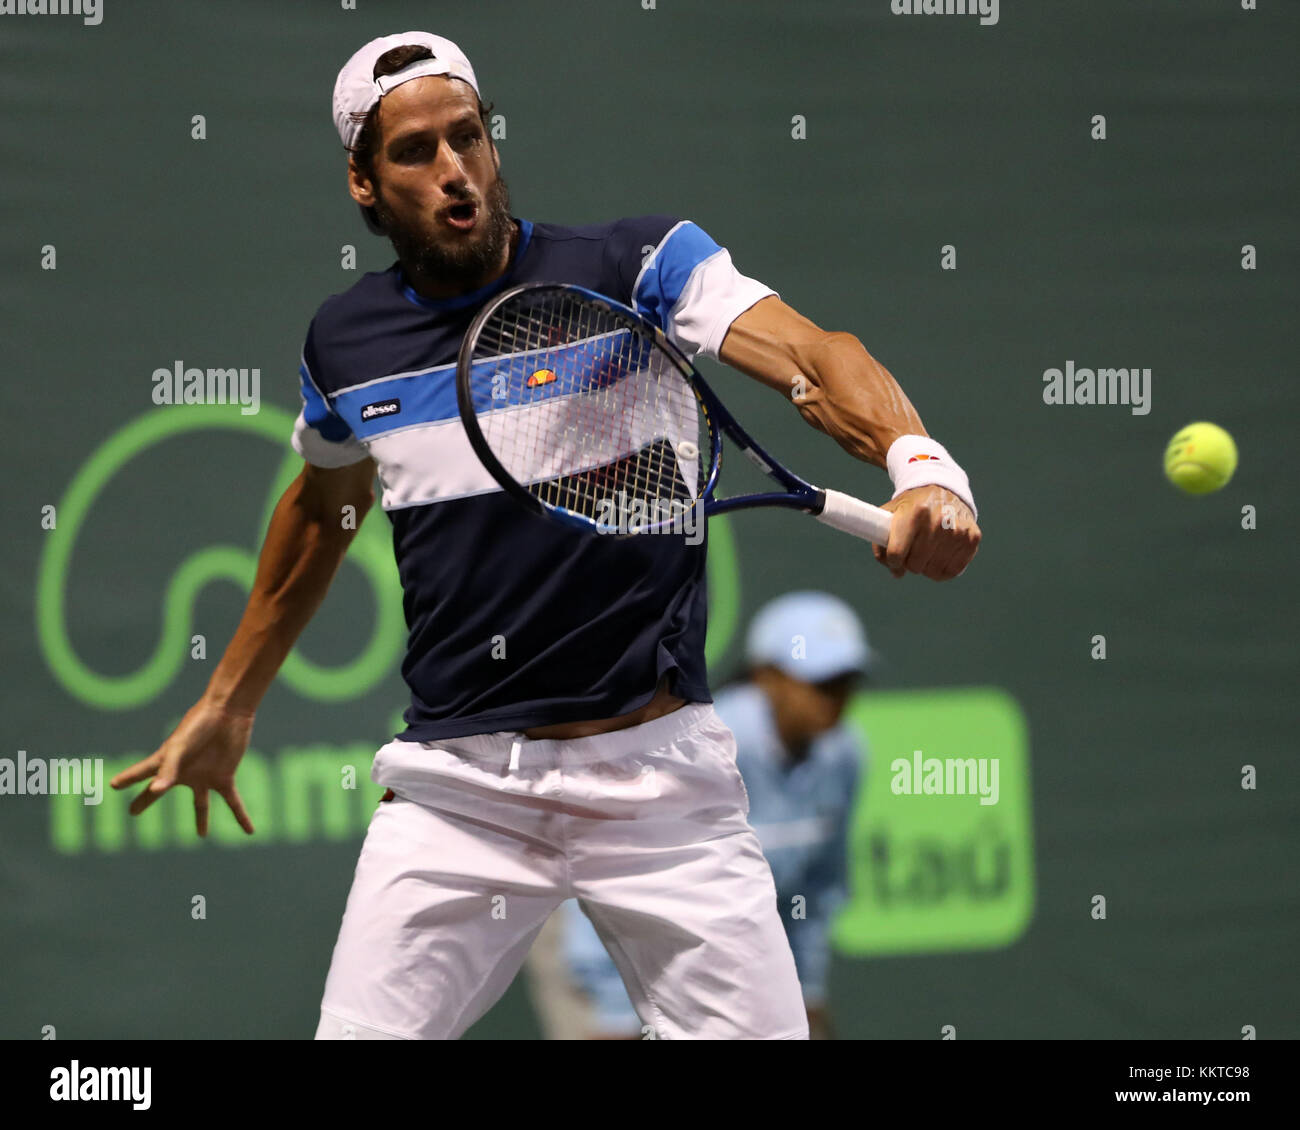 KEY BISCAYNE, FL - MARCH 25: Feliciano Lopez on day 6 of the Miami Open ...